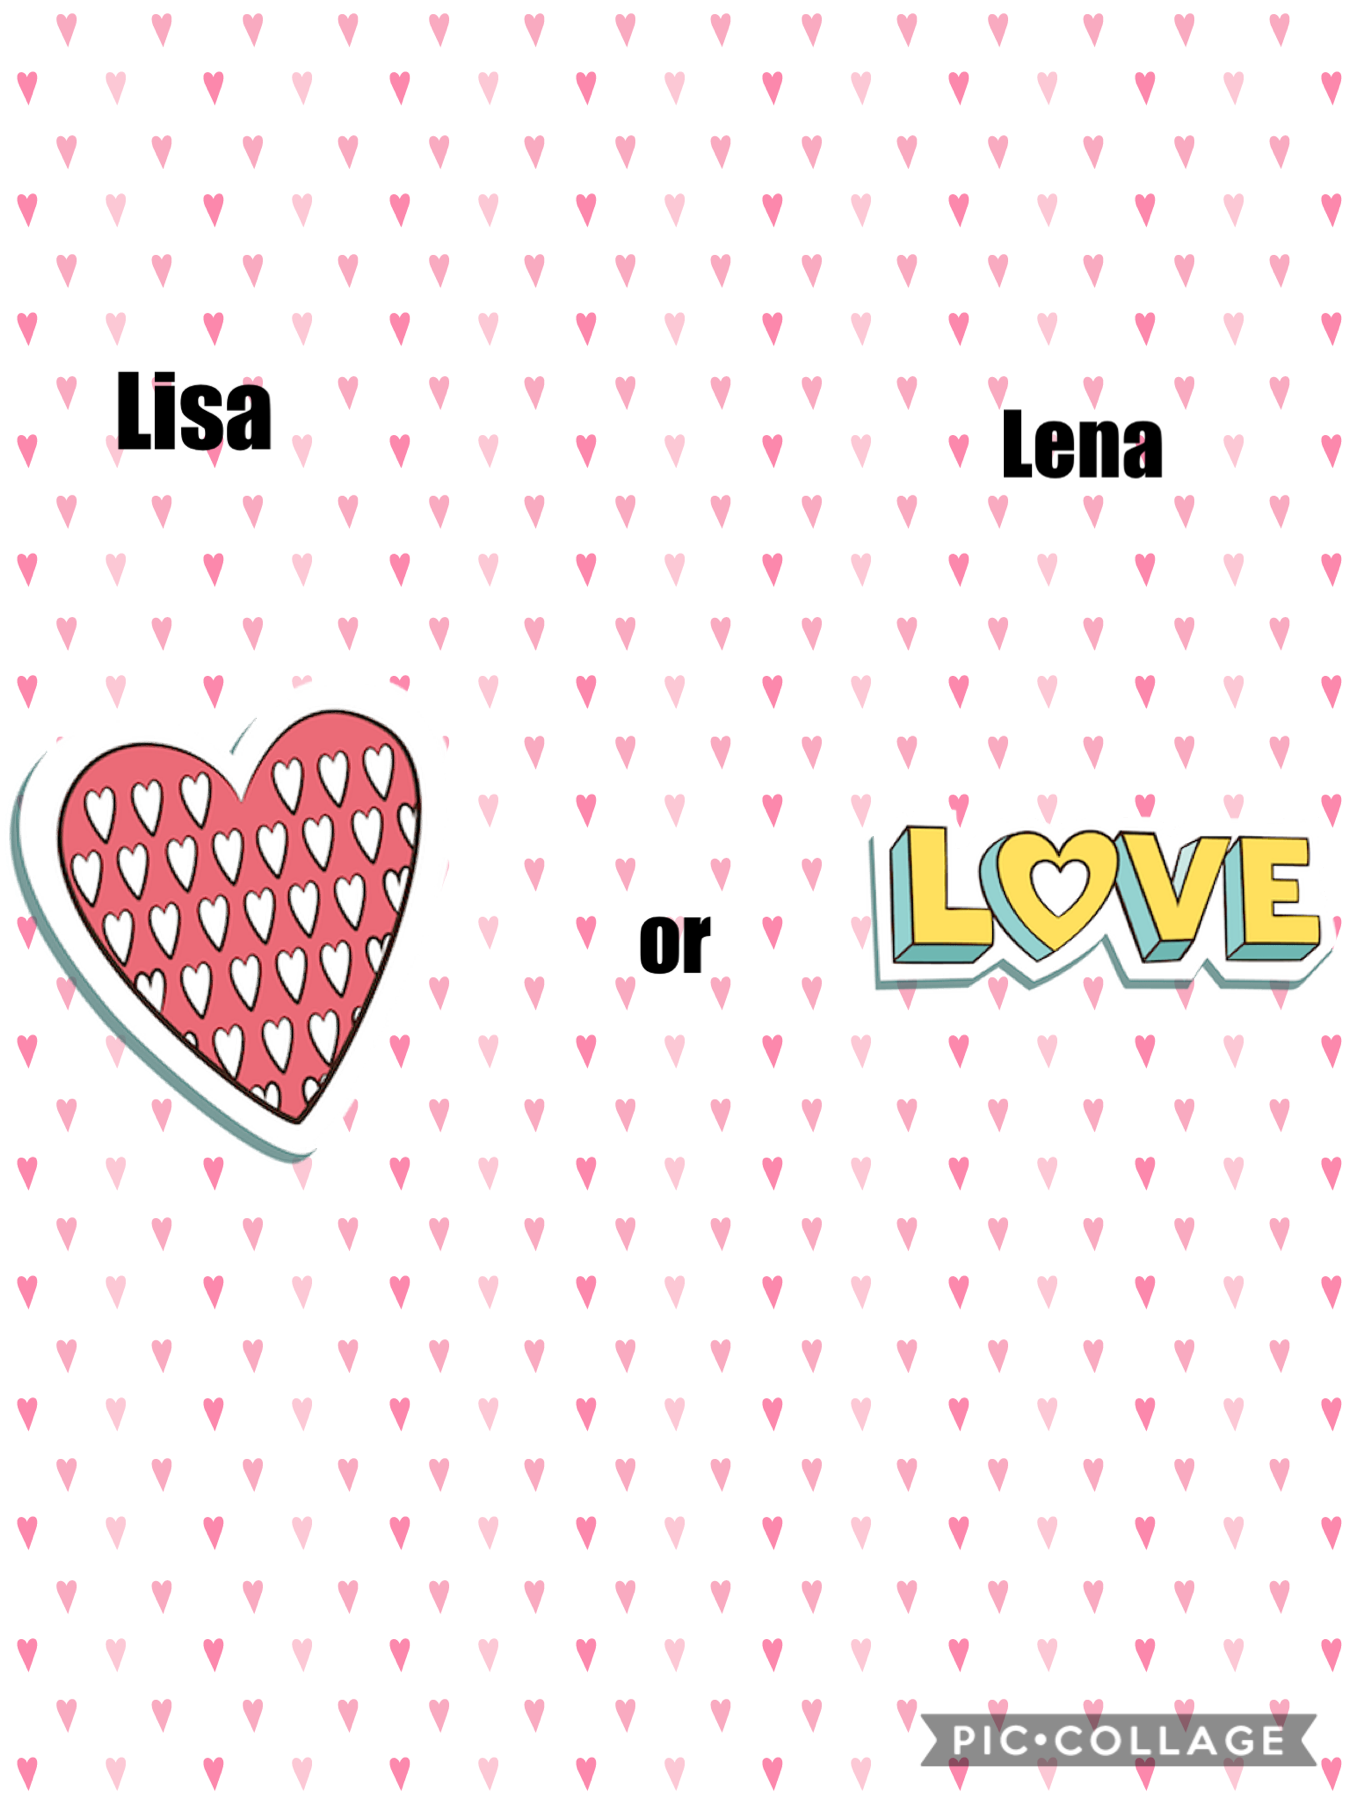 is your name: Lisa or Lena?